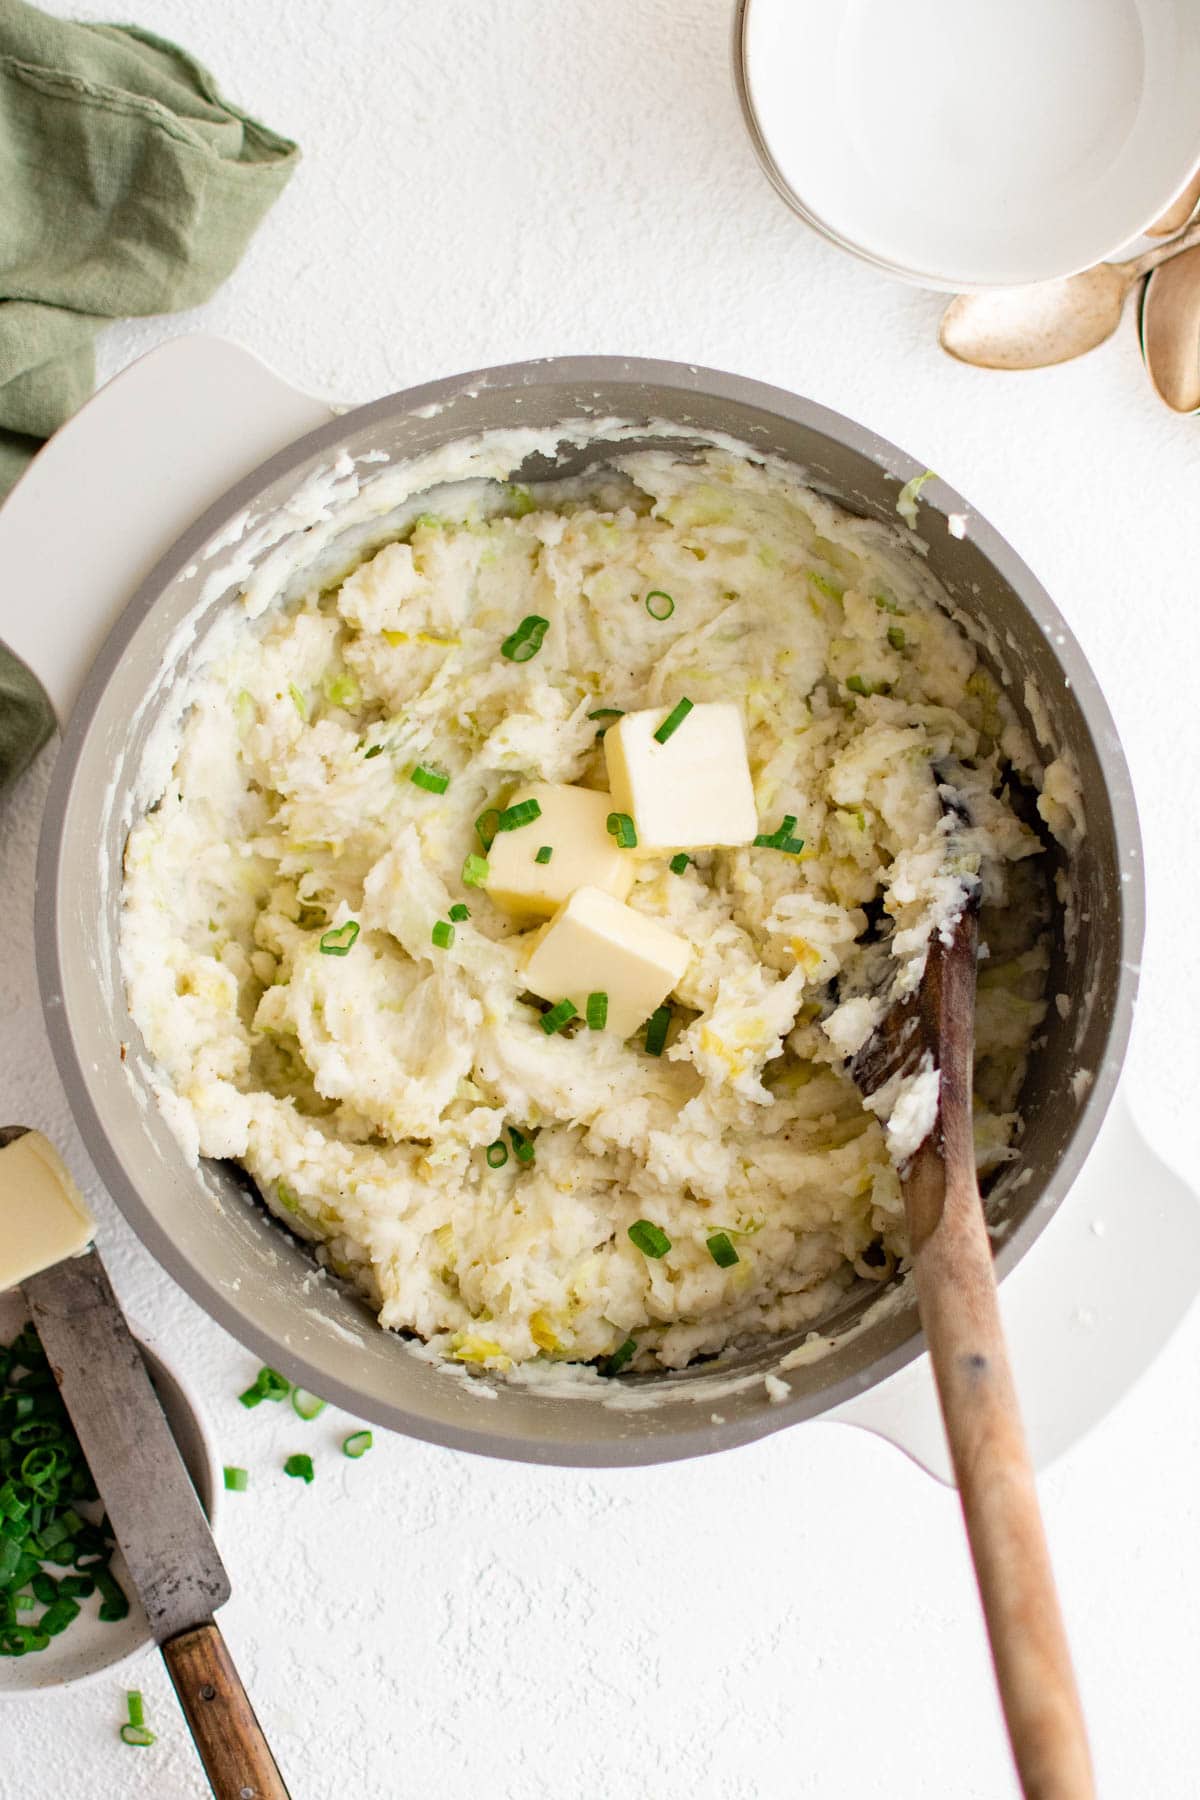 Mashed potatoes with cabbage in a bowl with a spoon.